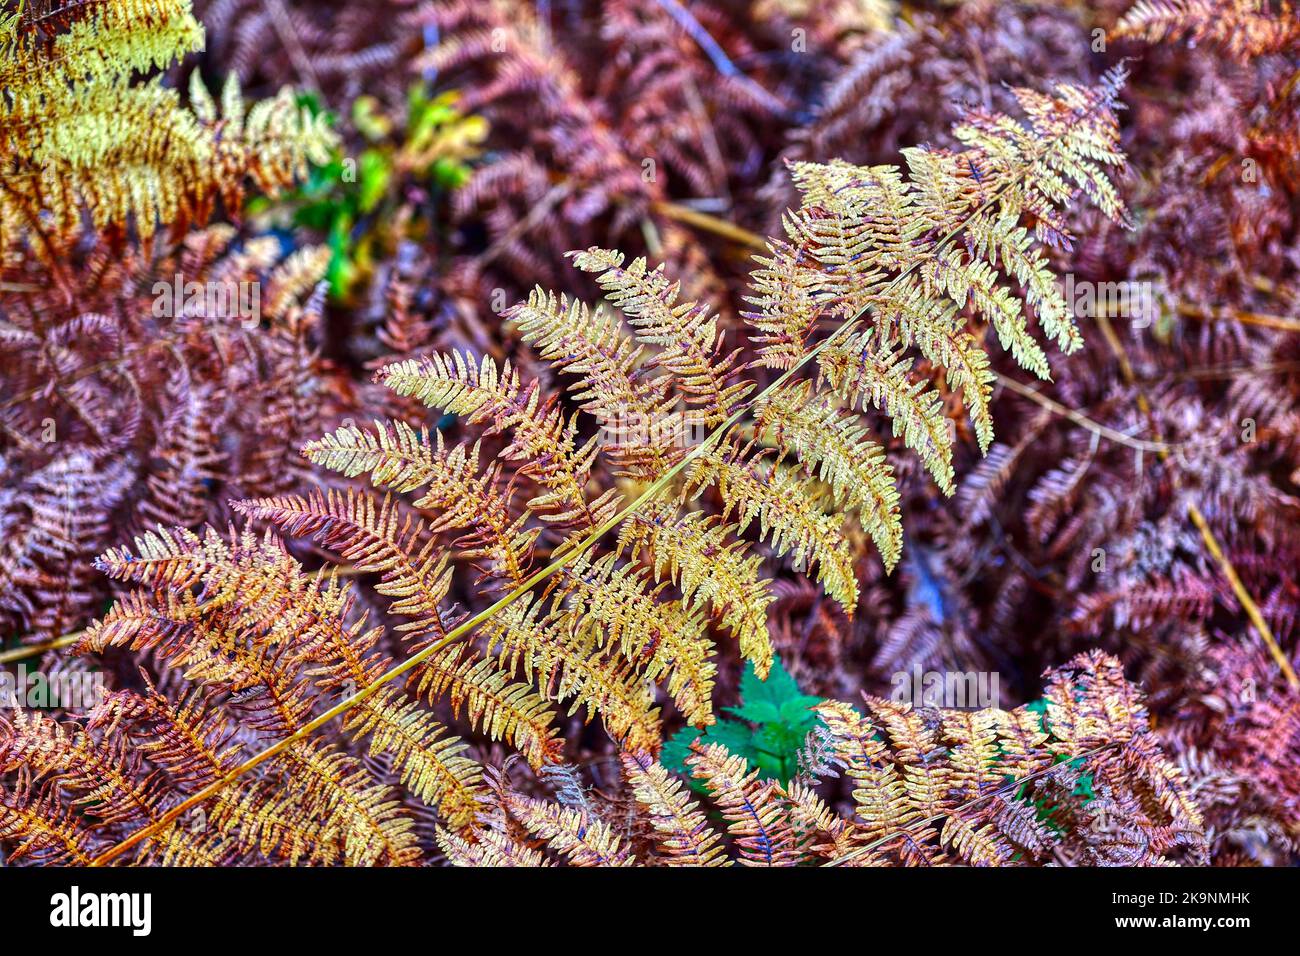 A bracken frond (leaf) changing colour in autumn Stock Photo